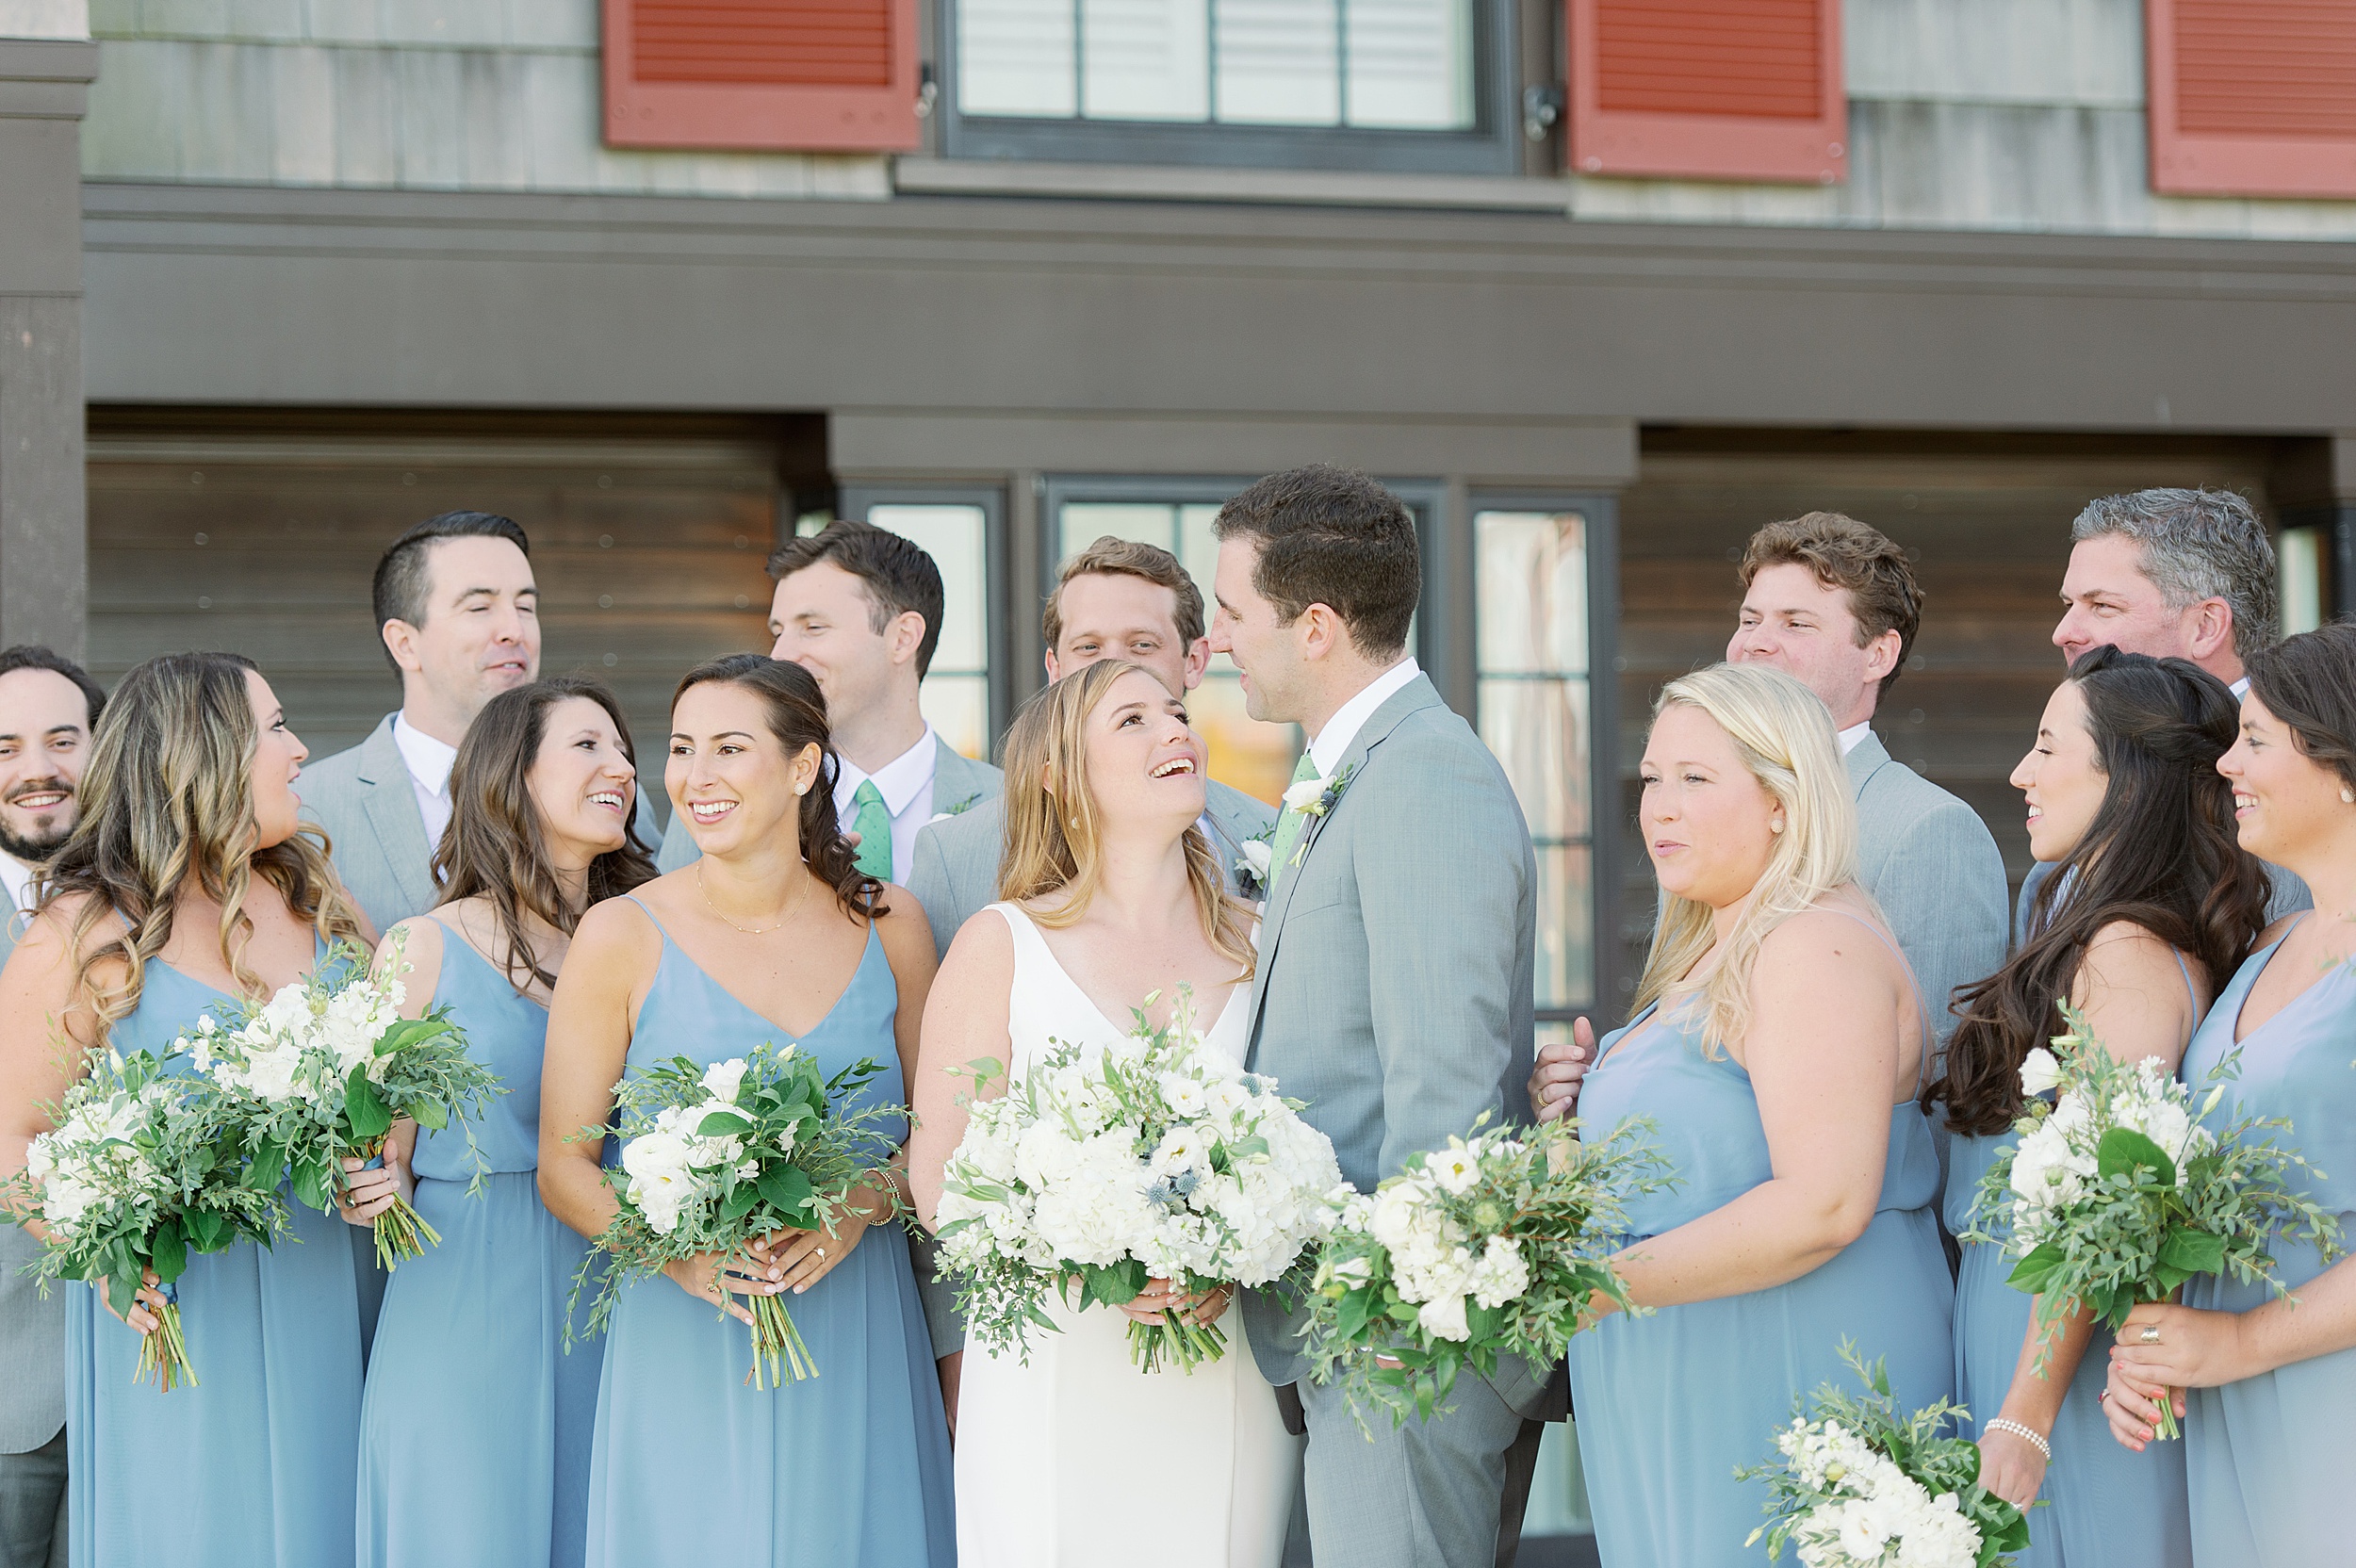 wedding party portraits in pale blue dresses and gray suits